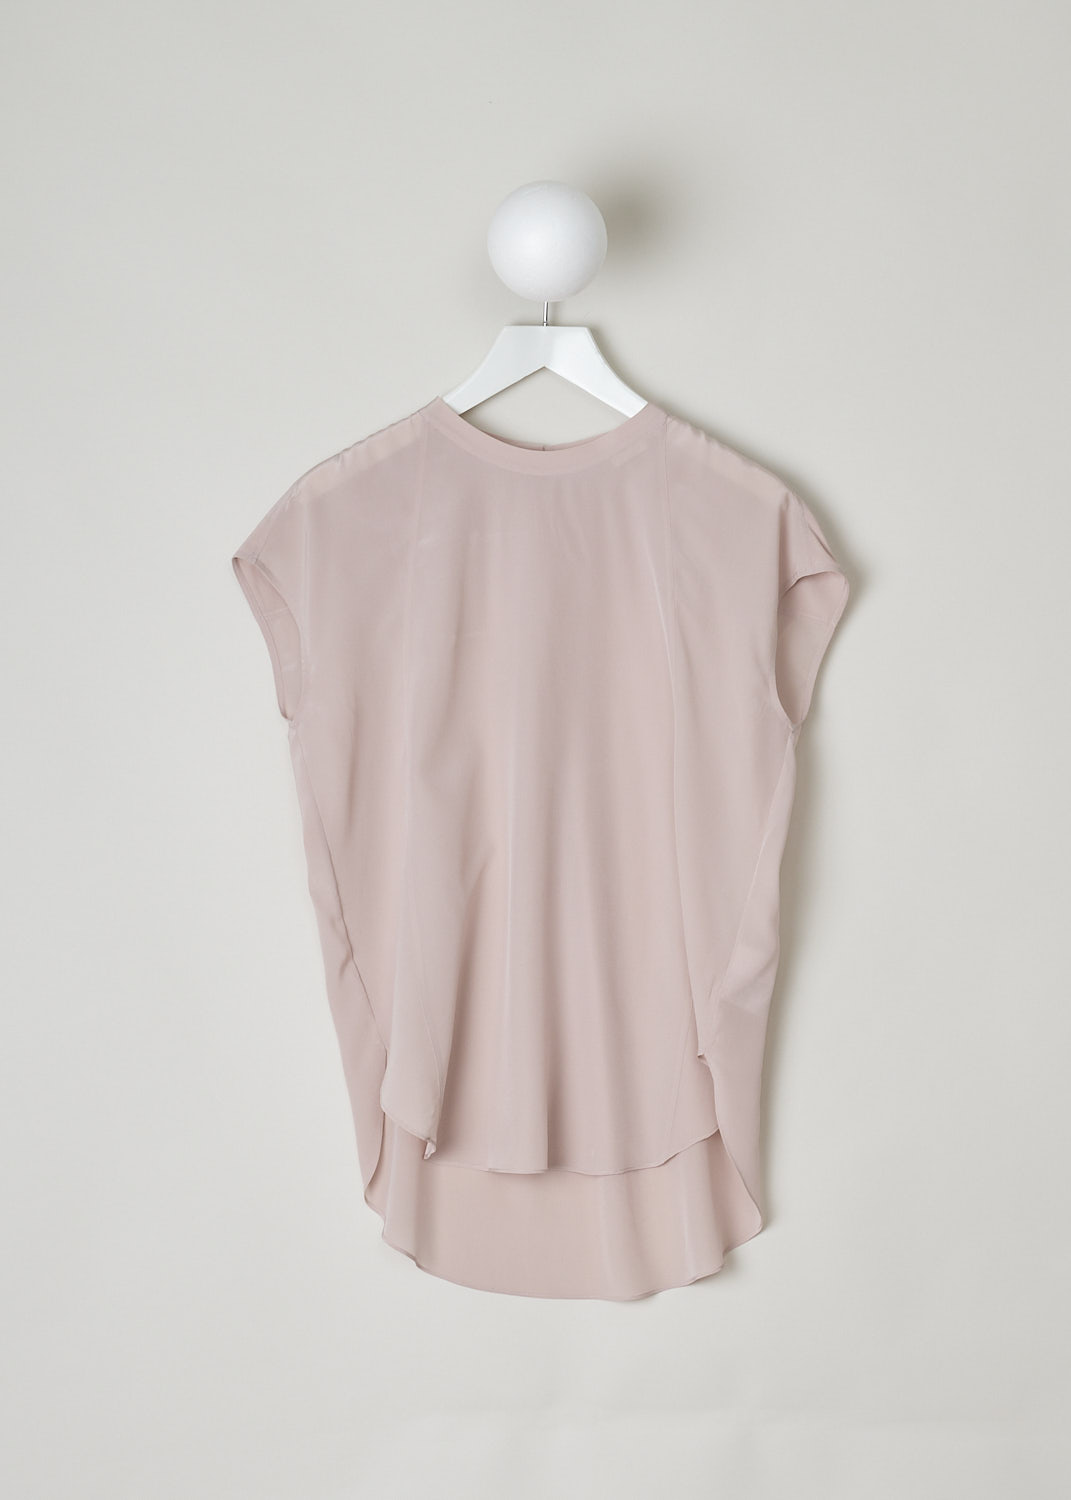 BRUNELLO CUCINELLI, BLUSH PINK SILK TOP, MB993EQ100_C8577, Pink, Front, This blush pink silk top has a rounded neckline and subtle cap sleeves. A paneled look is created by the two seams running vertically in the front. The top has a rounded hemline with a asymmetrical finish, meaning the back is longer than the front. In the back, a single button in the neck functions as the closure option, with a row of Monili beads decorating the seam. Also in the back, a single box pleat can be found.
